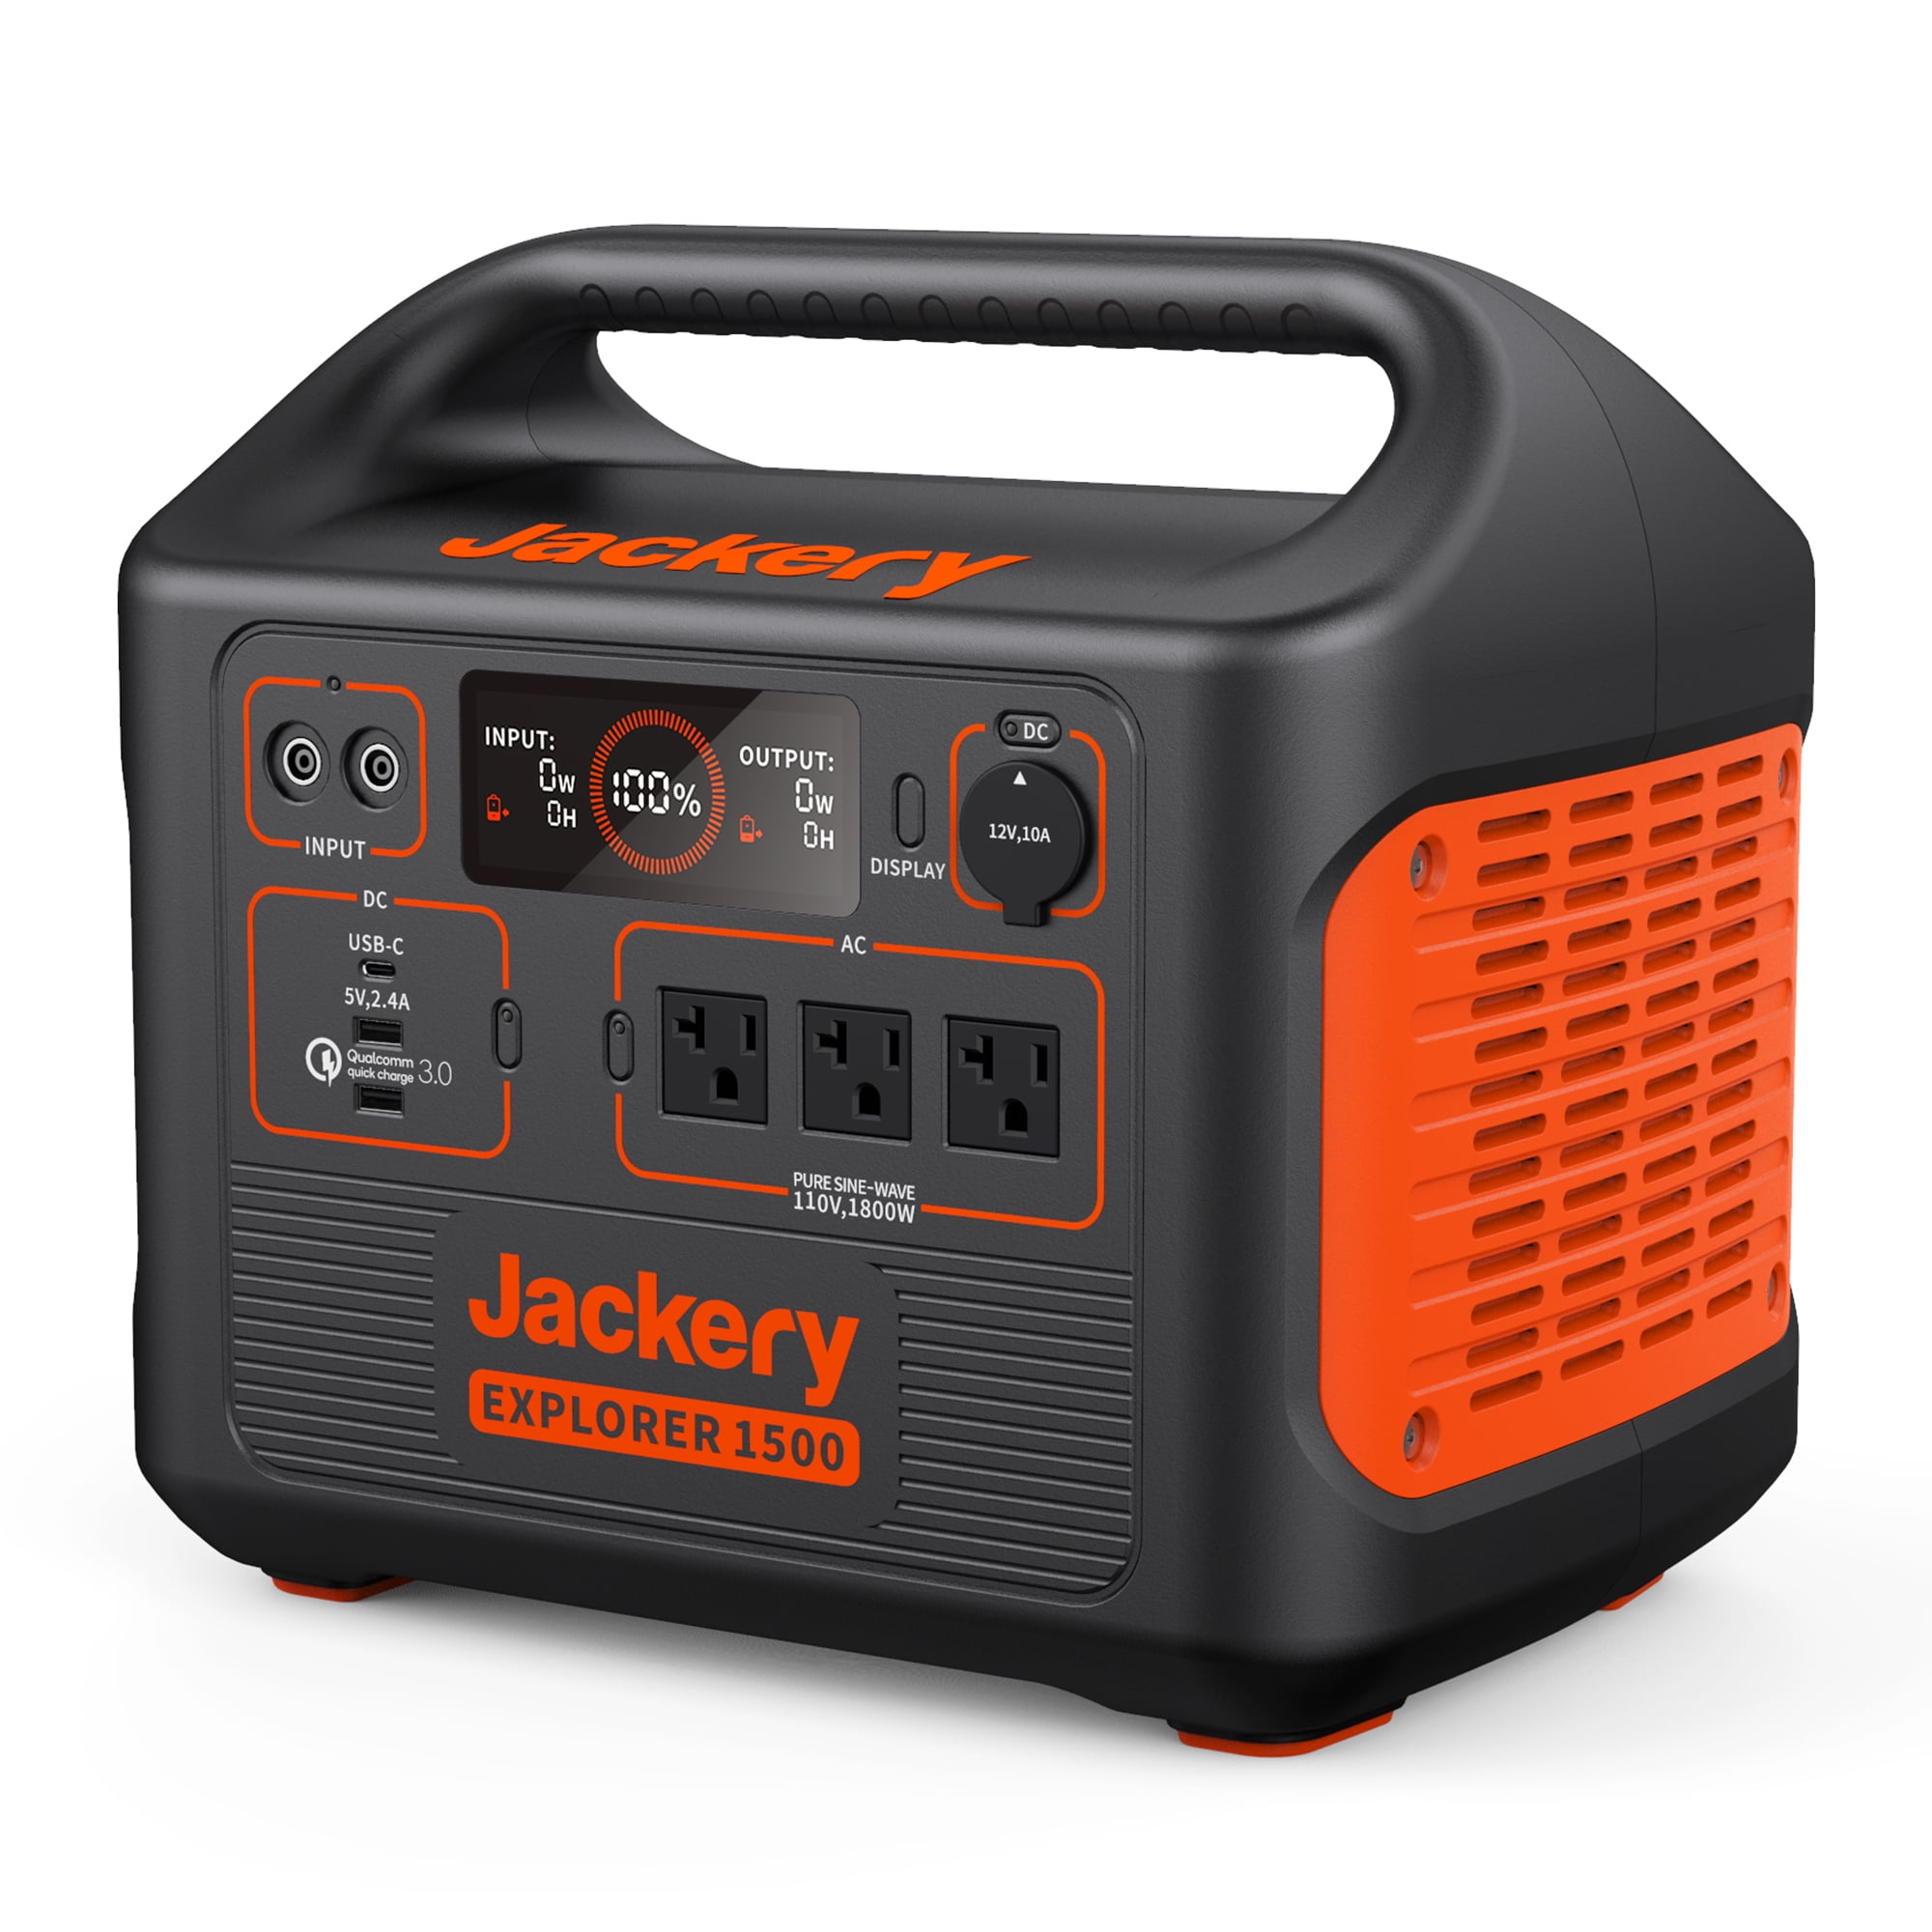 Jackery Portable Power Station, 293Wh Lithium Battery, 110V/300W AC